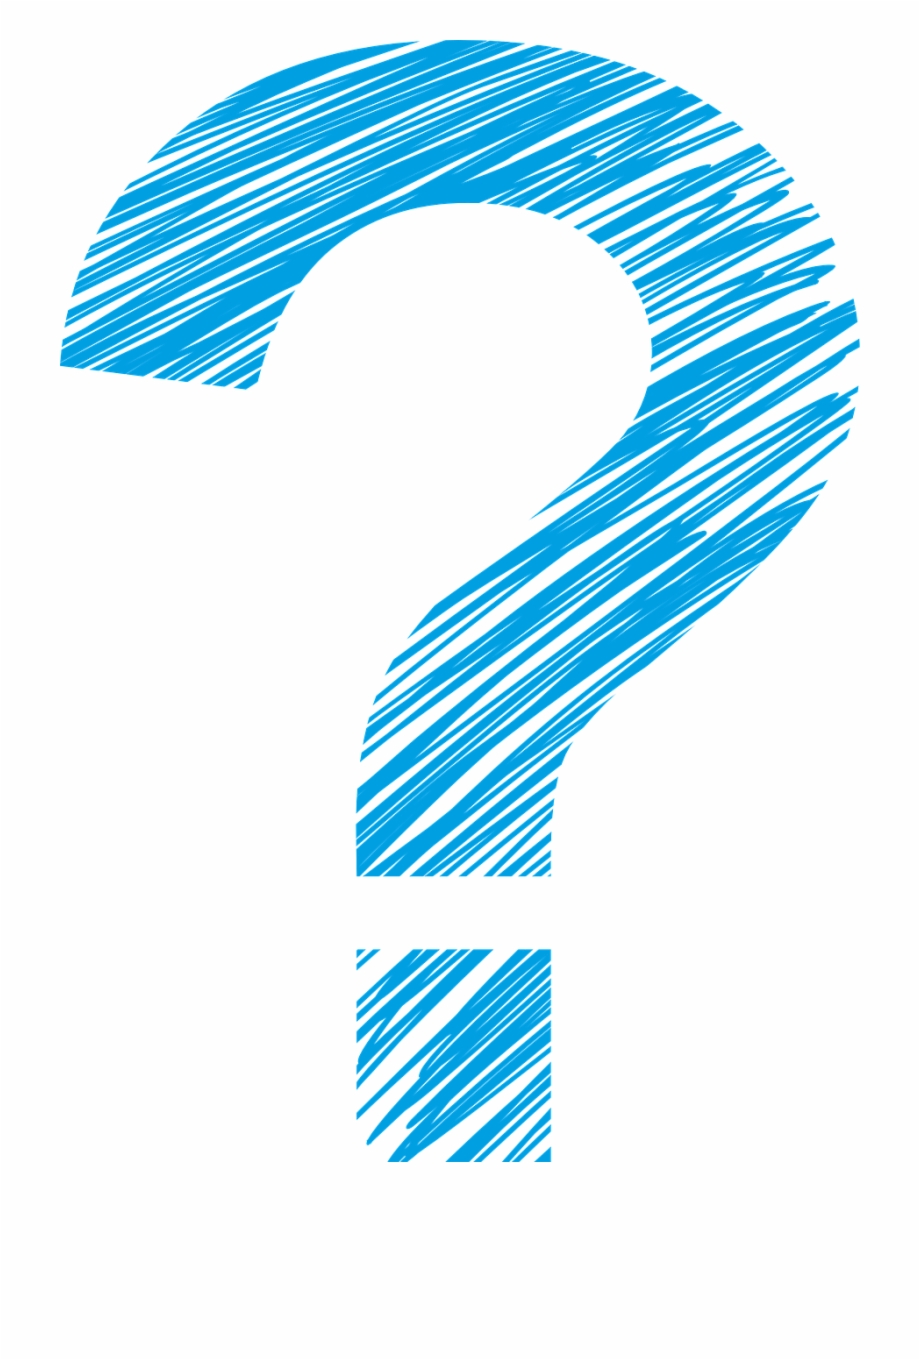 The Question Mark Sign Question Png Image Blue